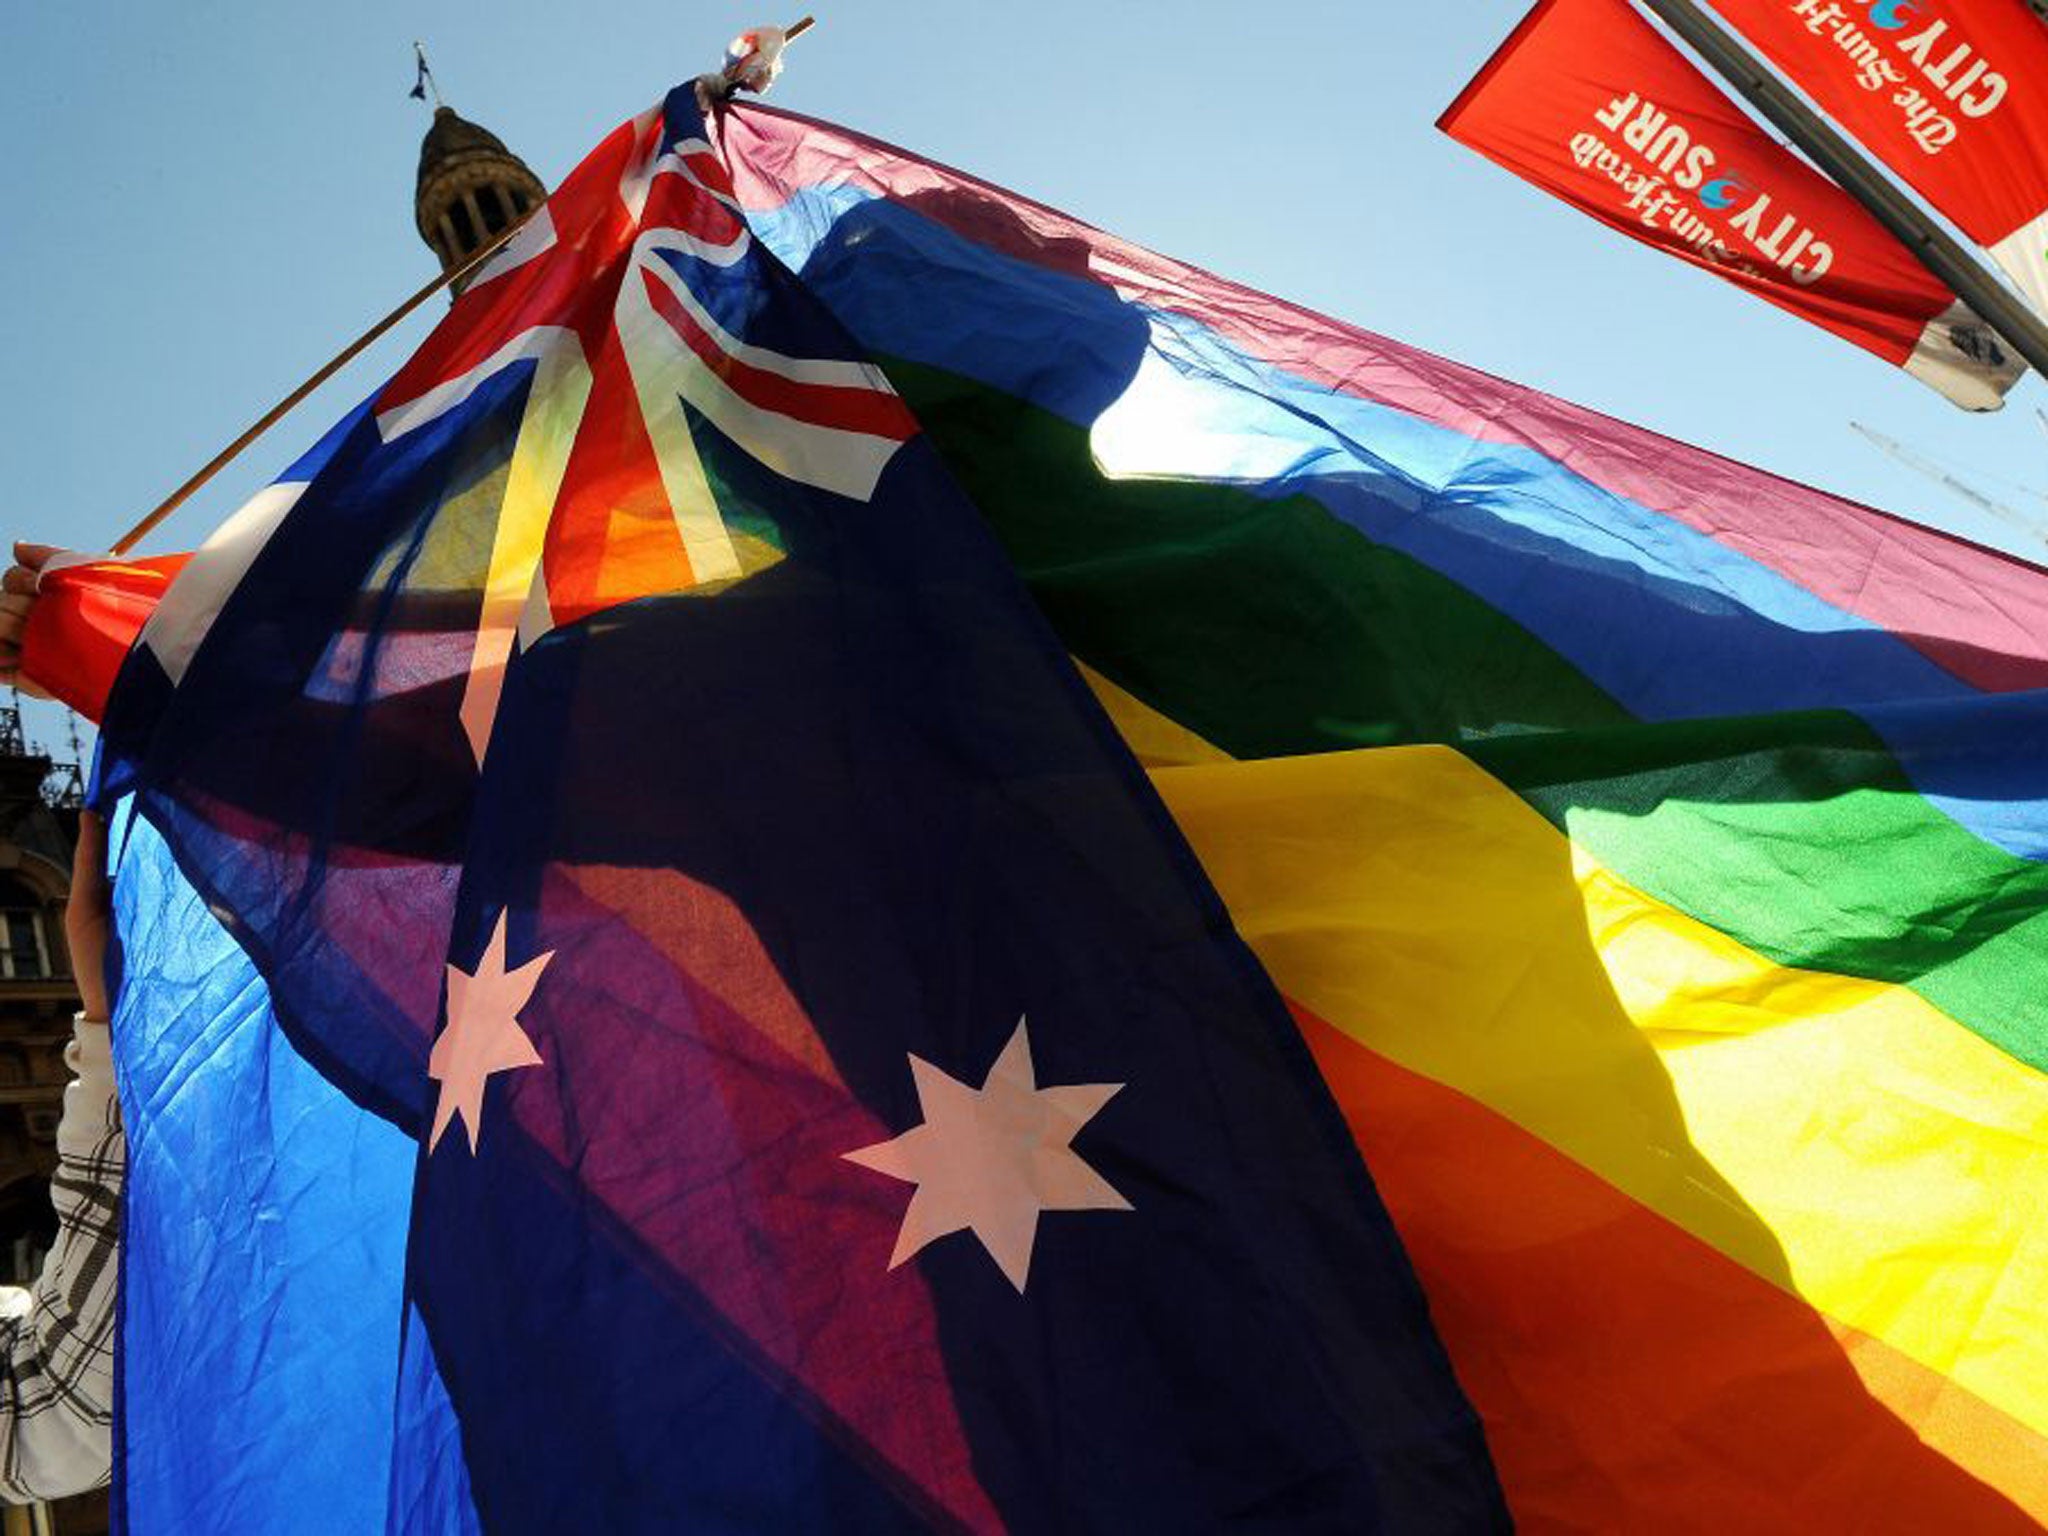 Tasmania could be the first state in Australia to allow gay marriage